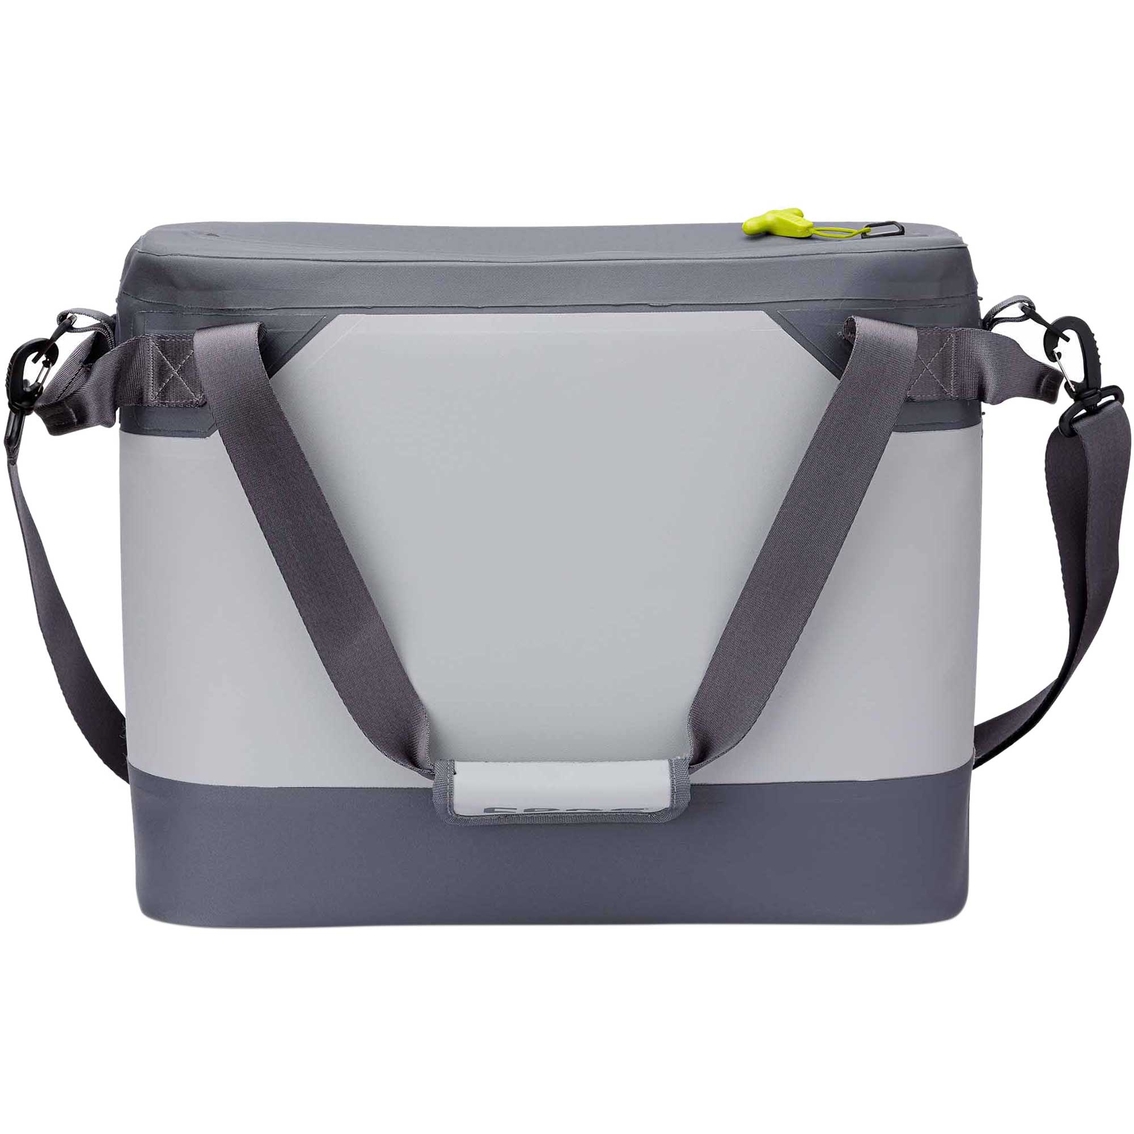 Core Equipment 20L Performance Soft Cooler Tote - Image 7 of 10